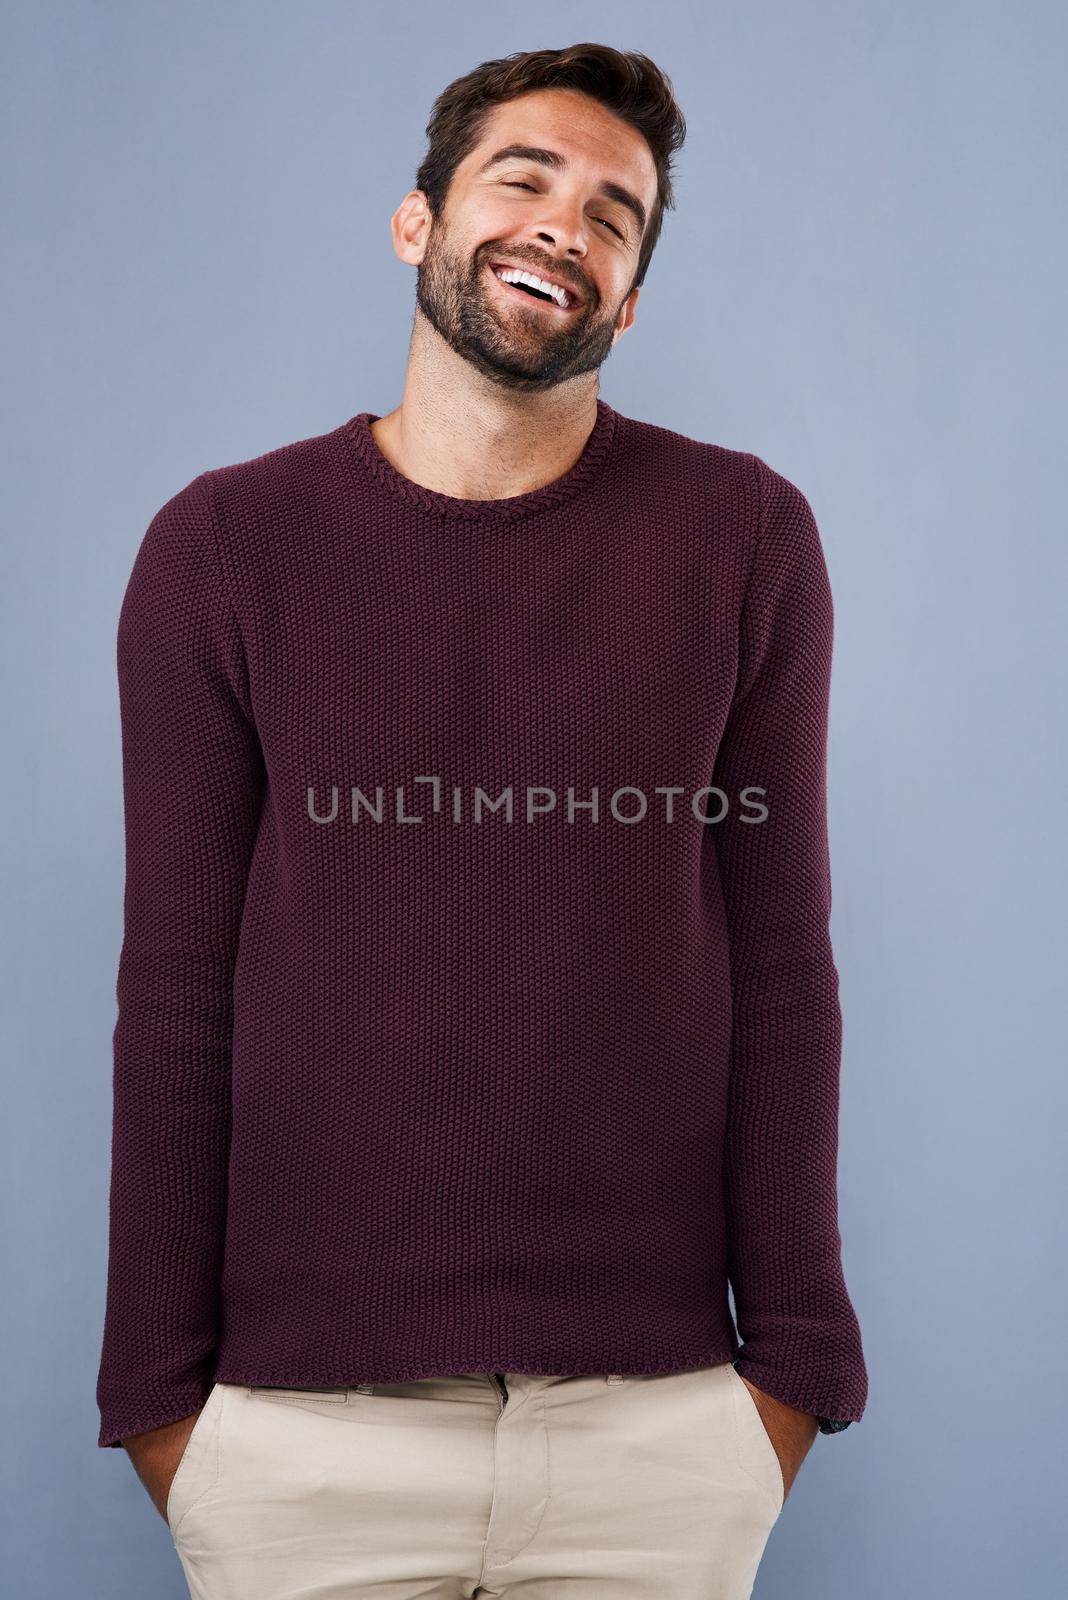 Studio shot of a handsome and happy young man posing against a gray background.